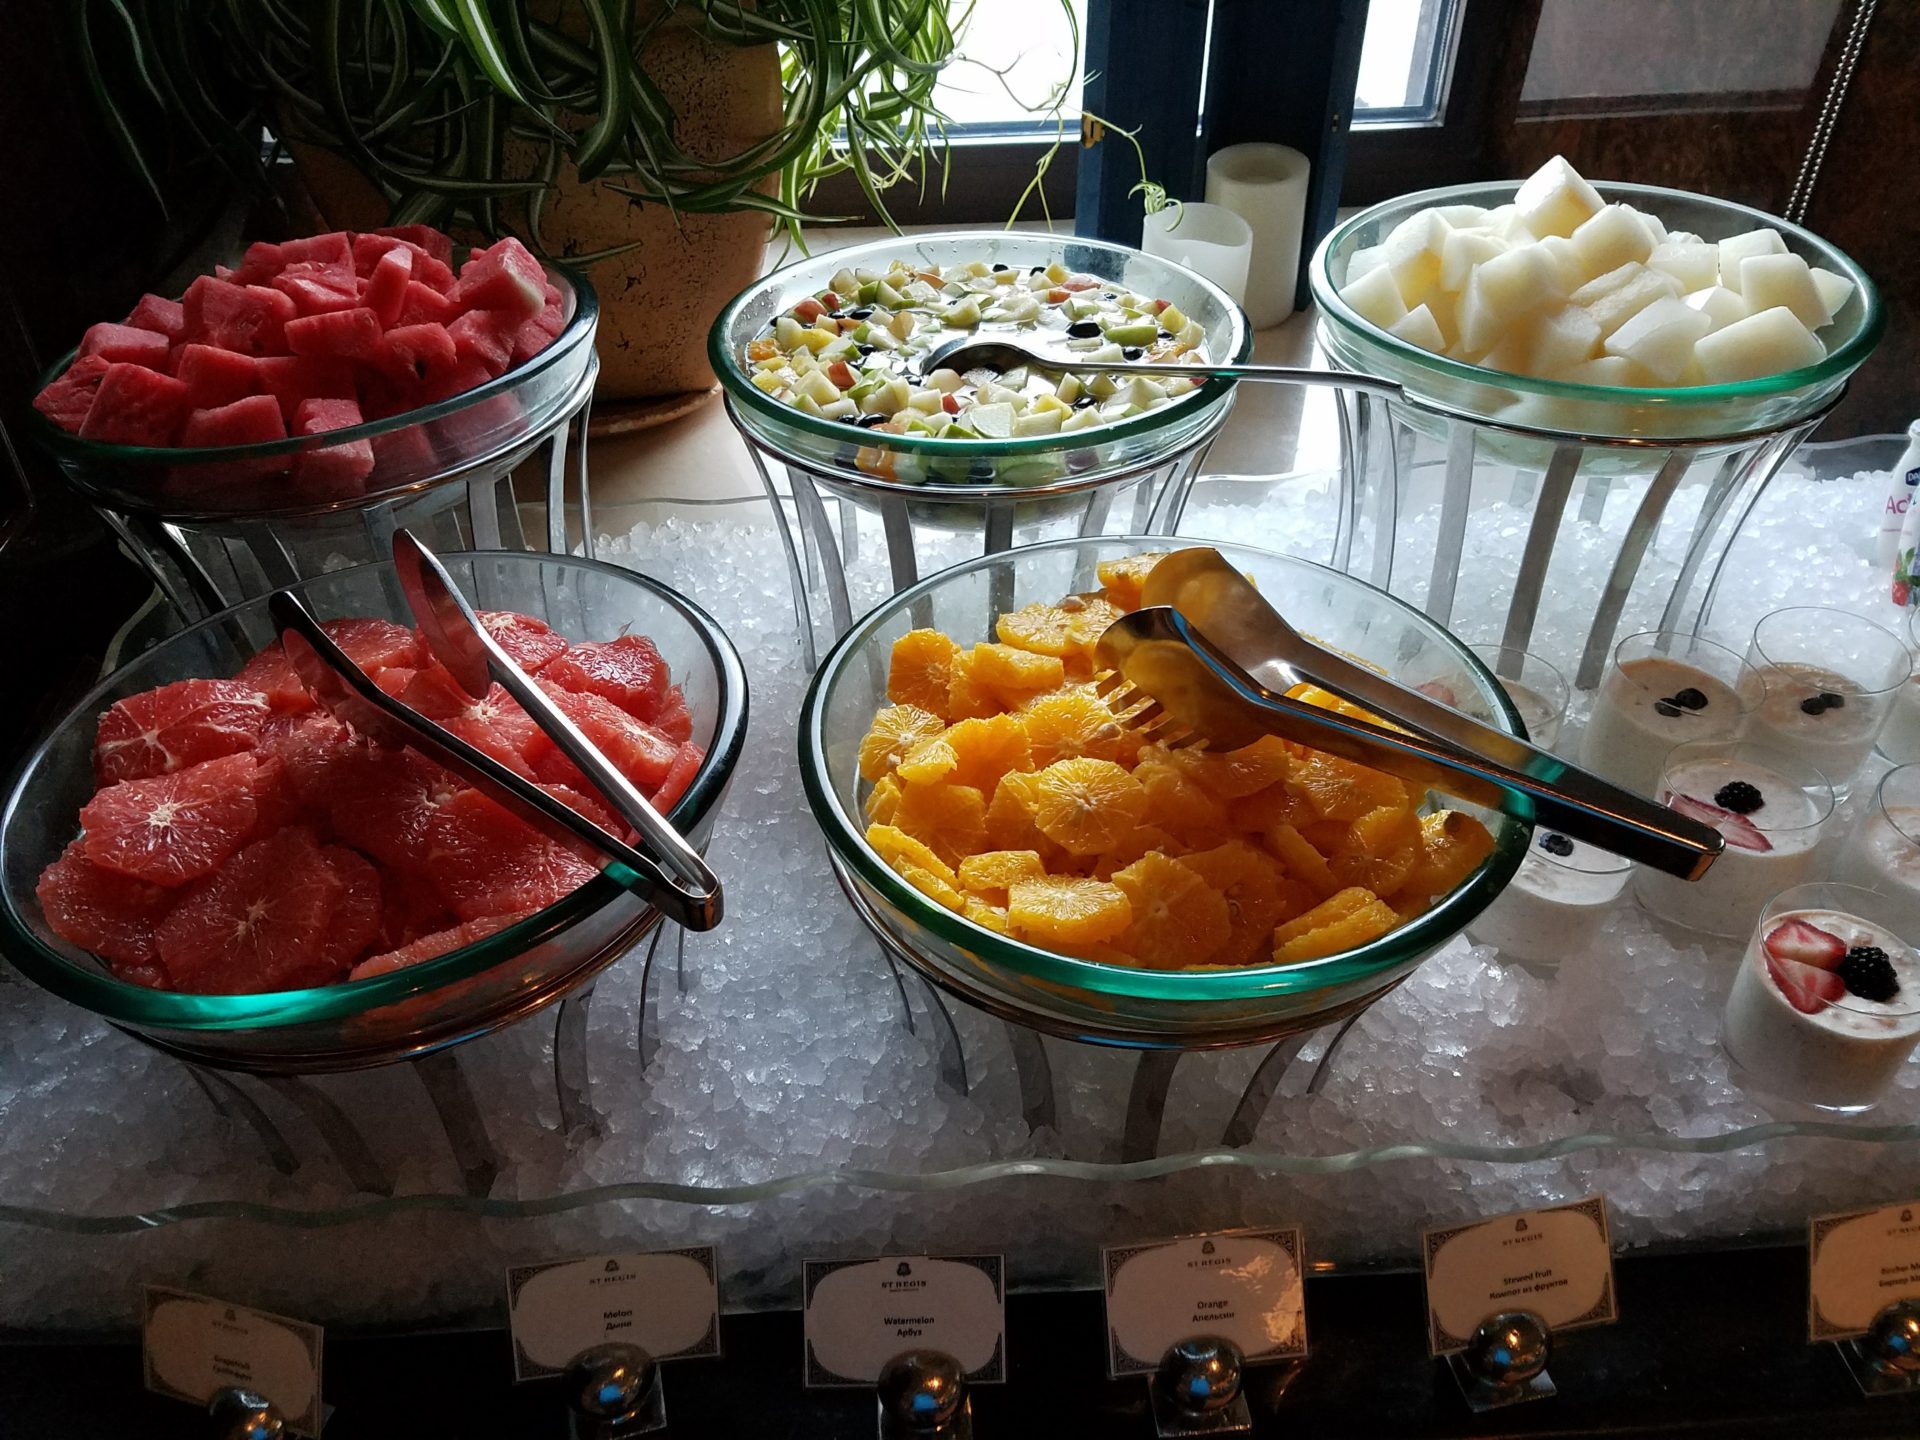 a group of bowls of fruit on ice